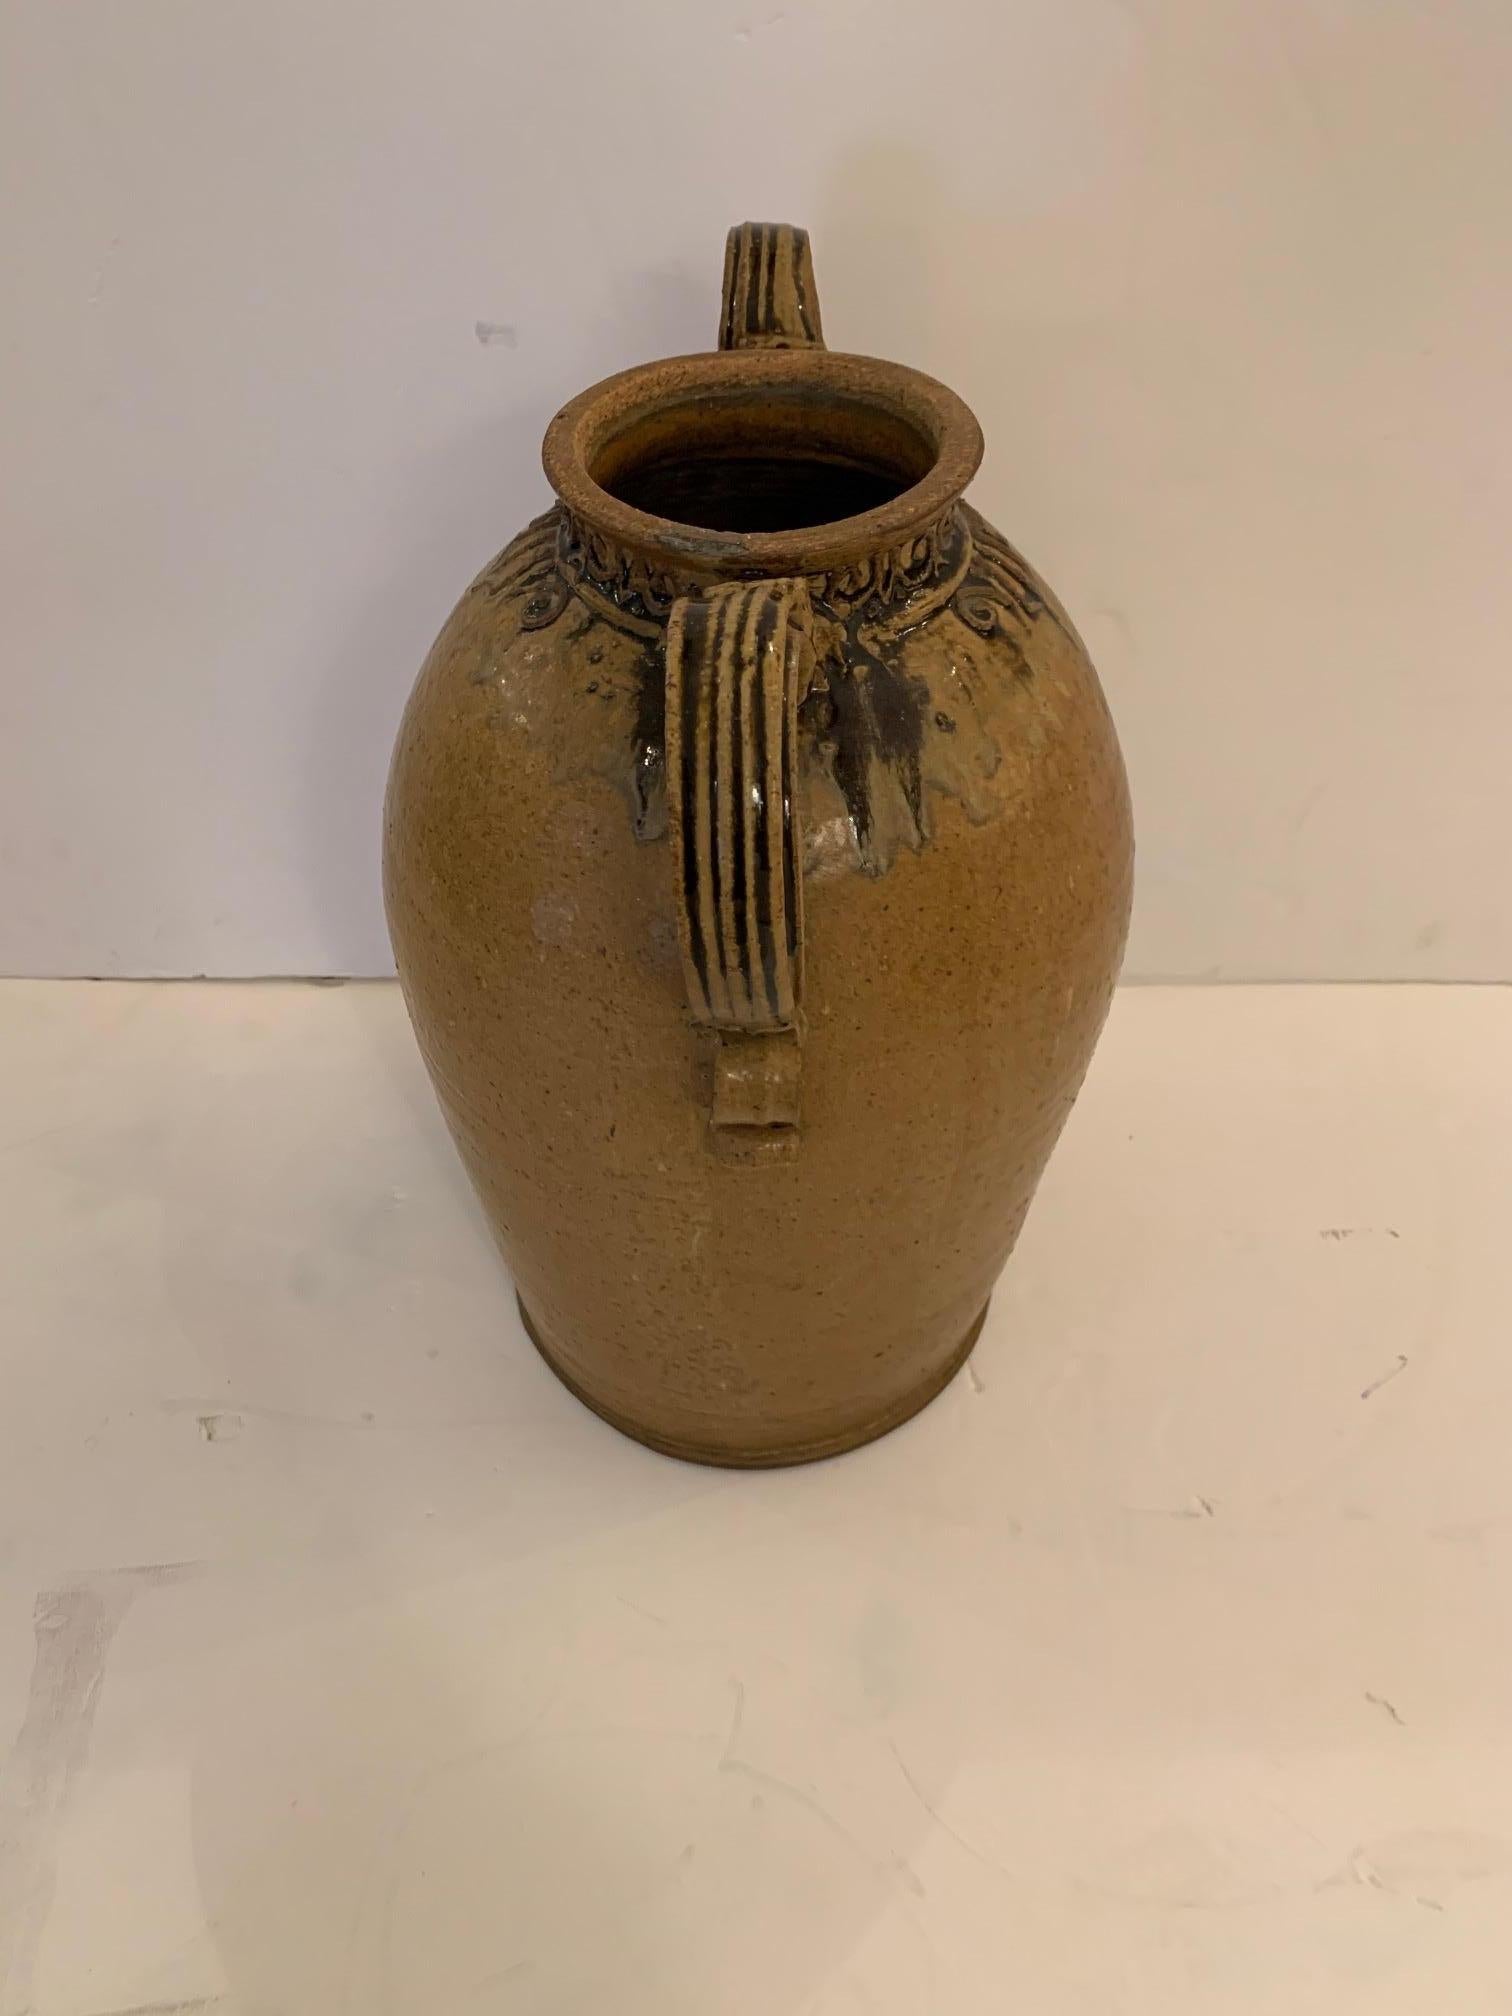 Artisan made beautiful earthy pottery vessel in a gorgeous warm terracotta color with great curlicue design around the top with two stylized handles. Signed on bottom.